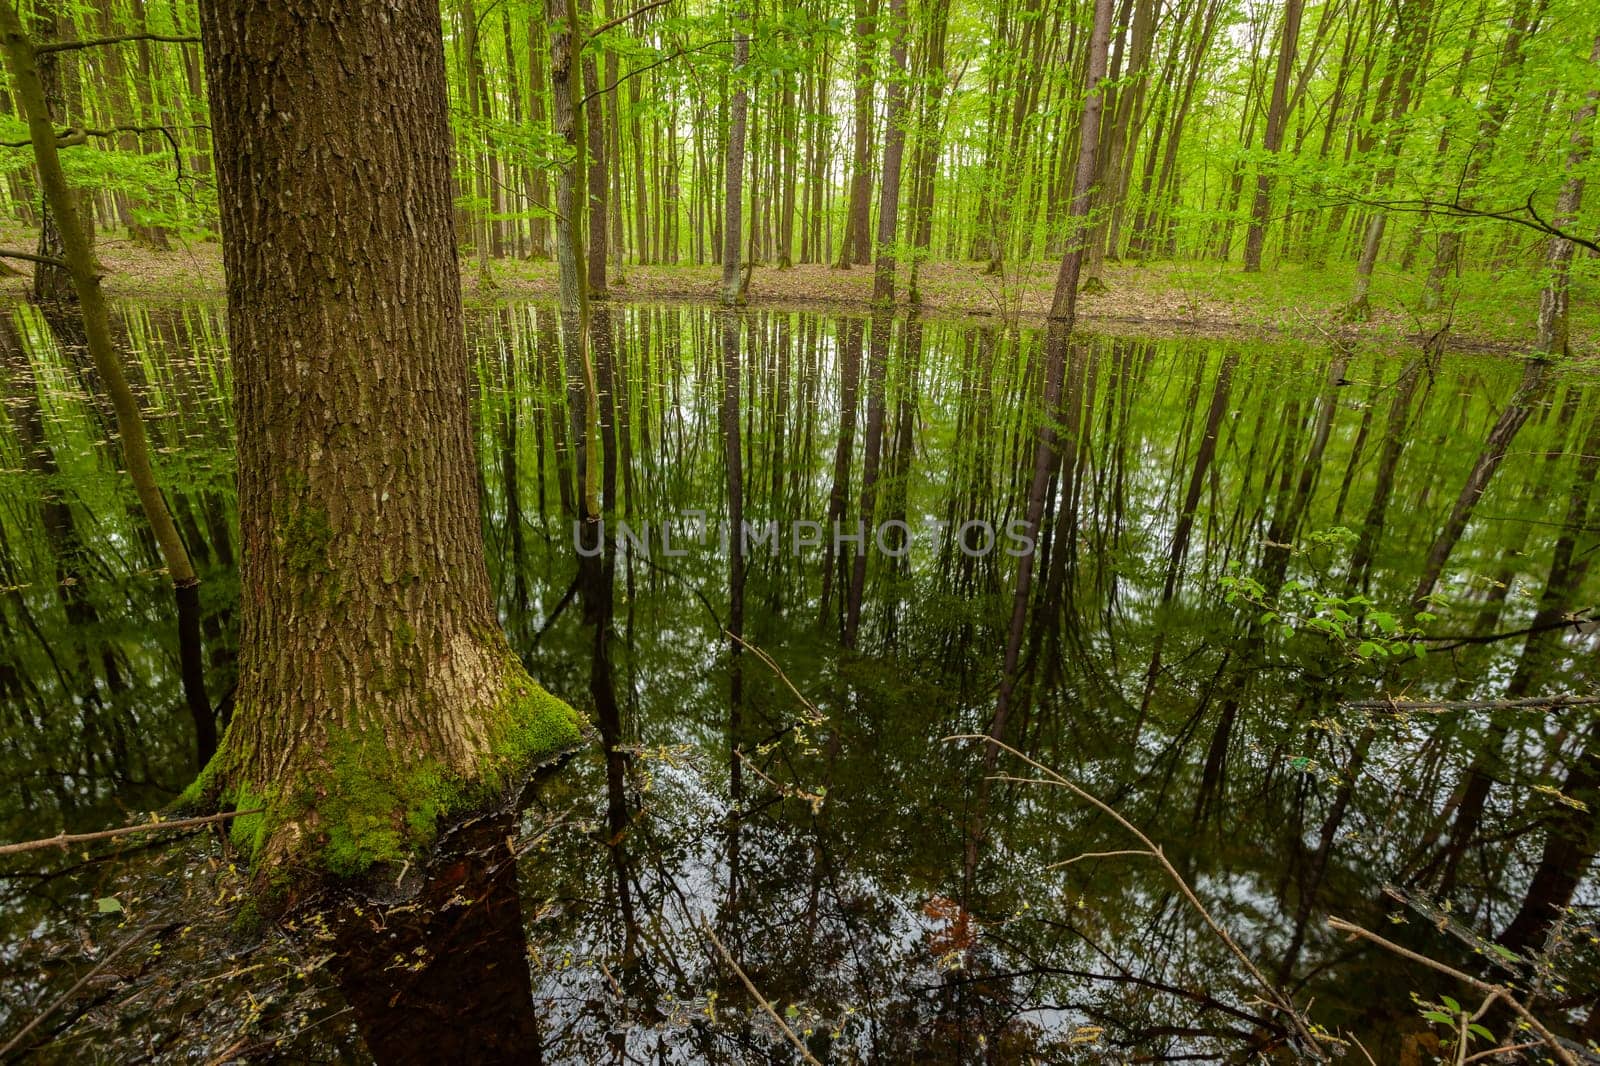 Wet forest and the reflection of trees in the water, view on a spring day, eastern Poland